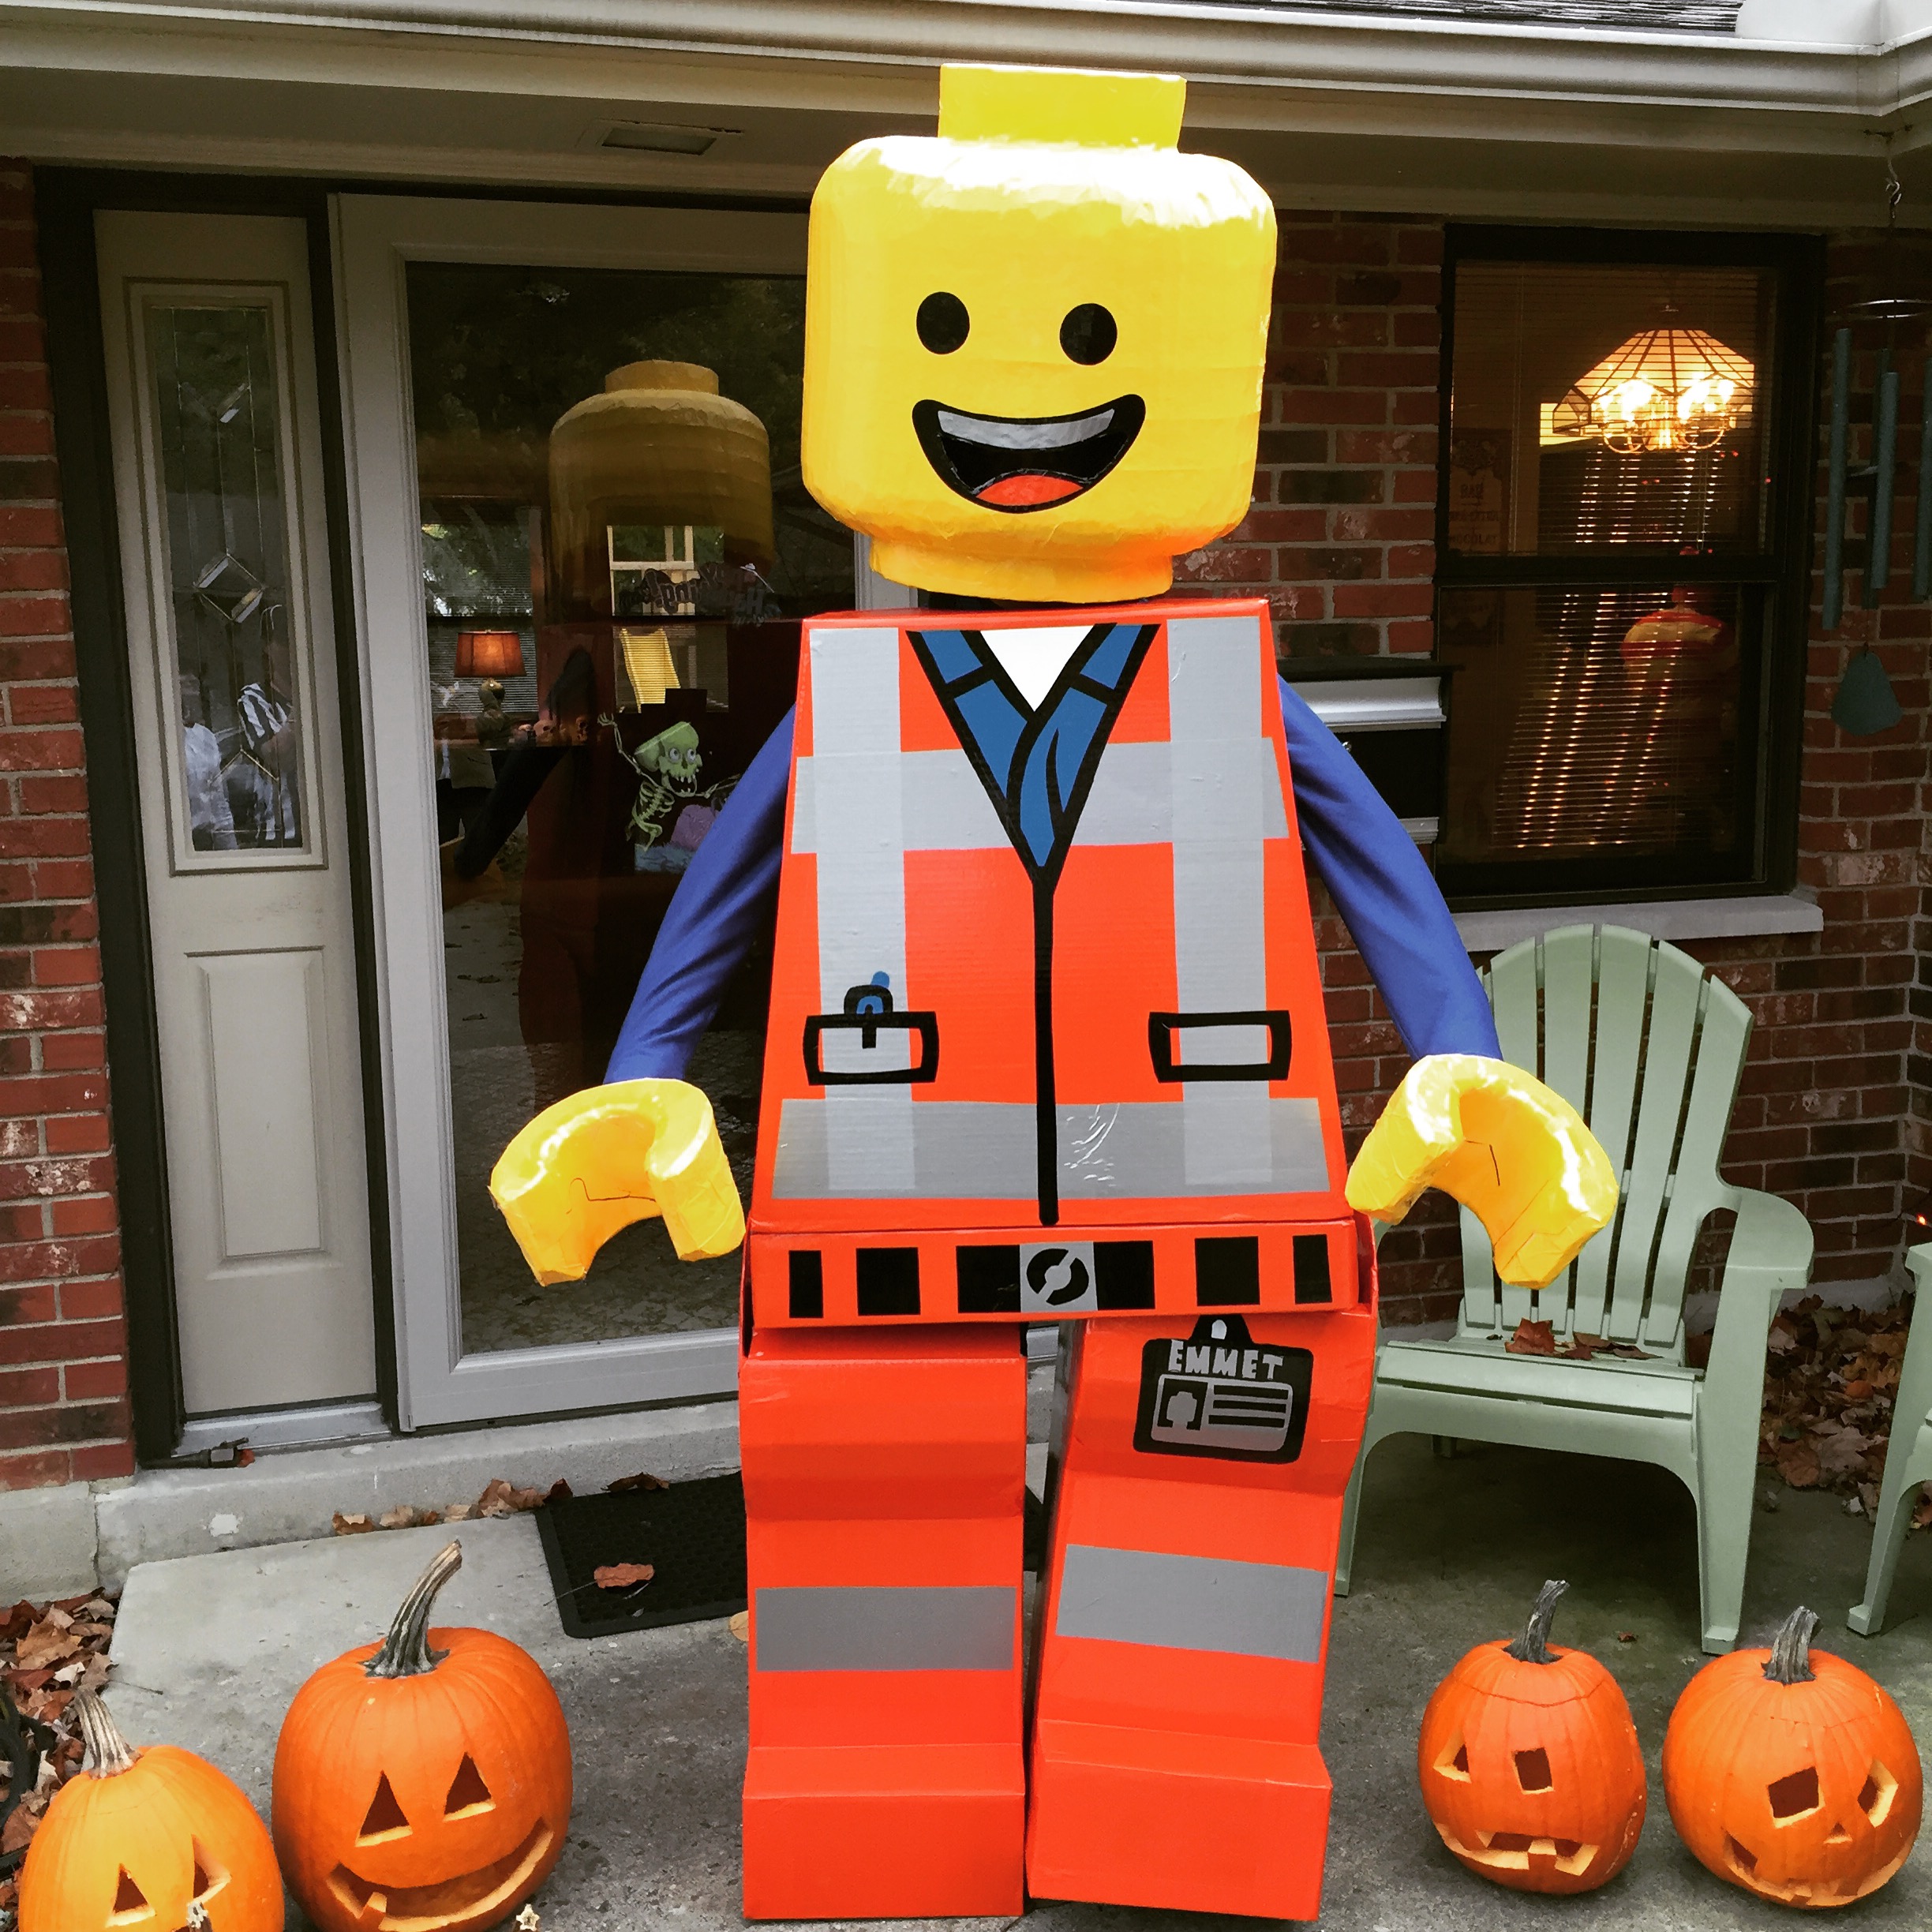 Building an Awesome Emmet Lego Halloween Costume